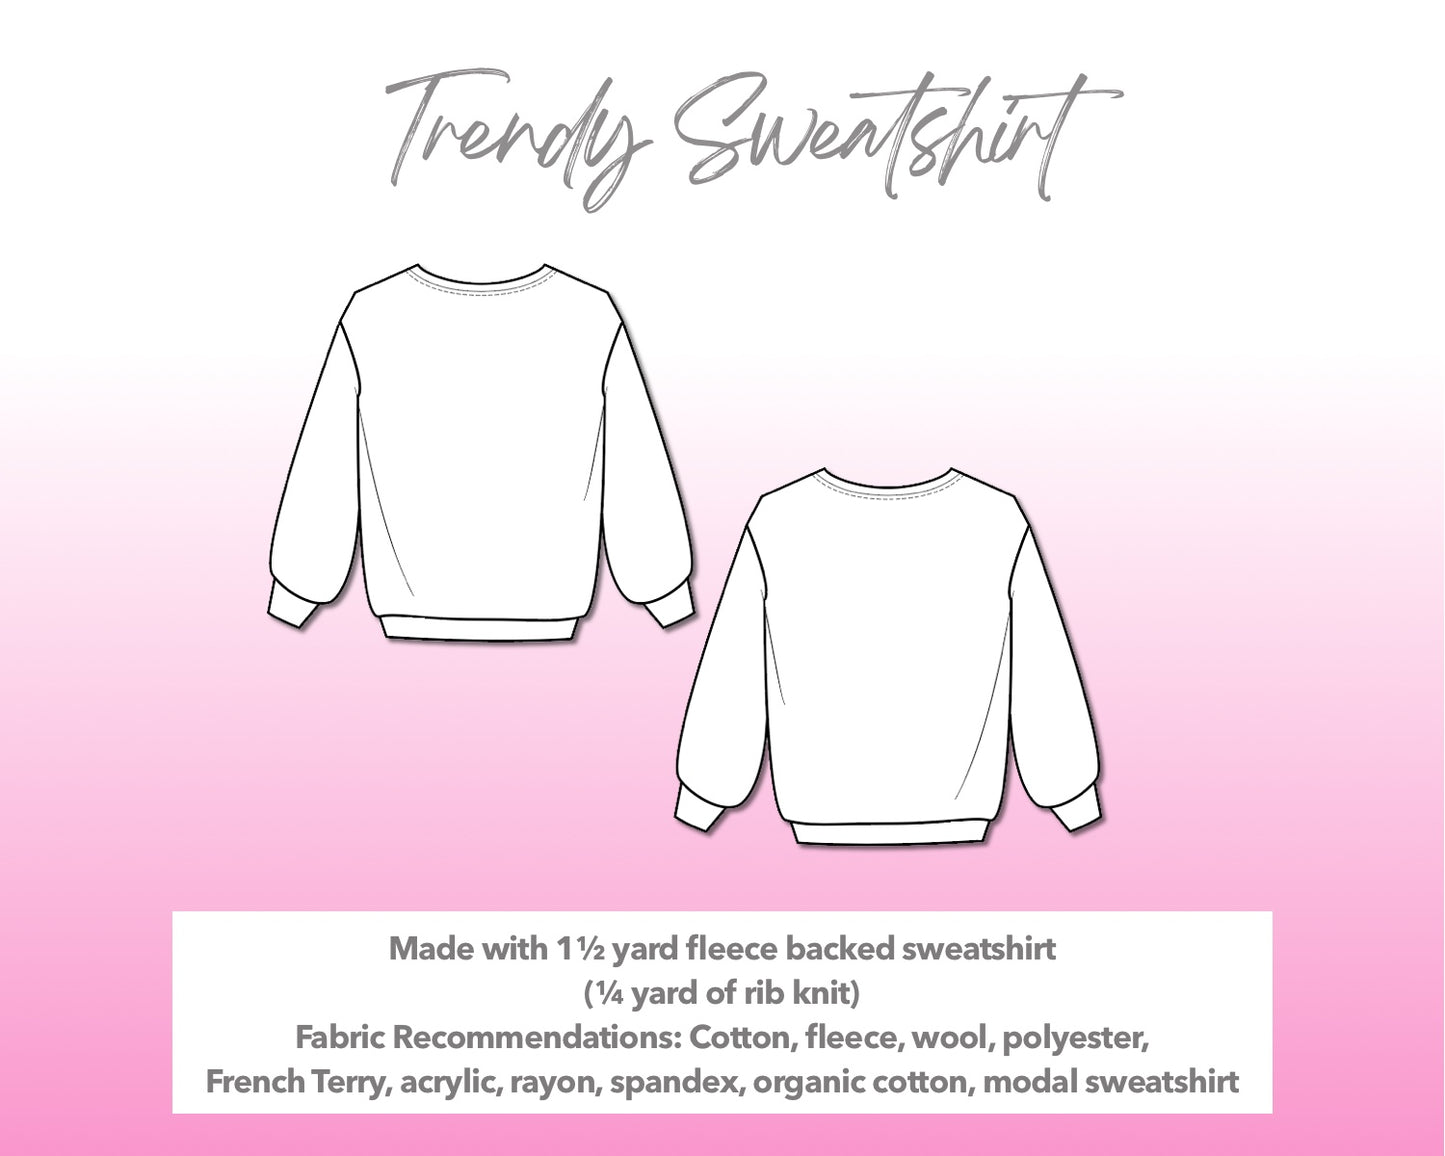 Illustration and detailed description for Trendy Sweatshirt sewing pattern.